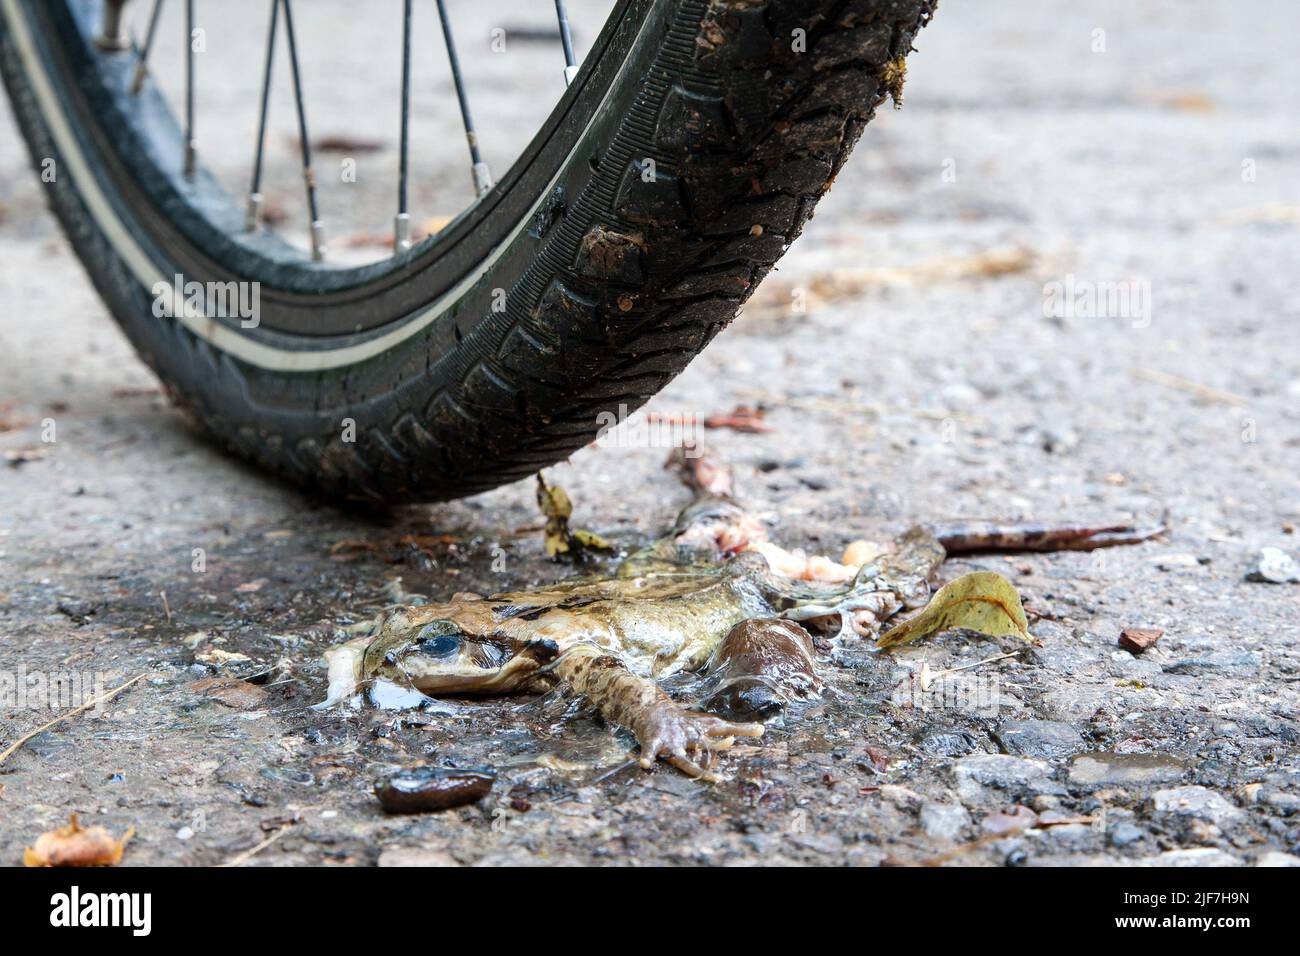 Toads, dead under the bike tire.In the first warm spring nights, toads leave their winter quarters and many of them are run over by cyclists. Stock Photo